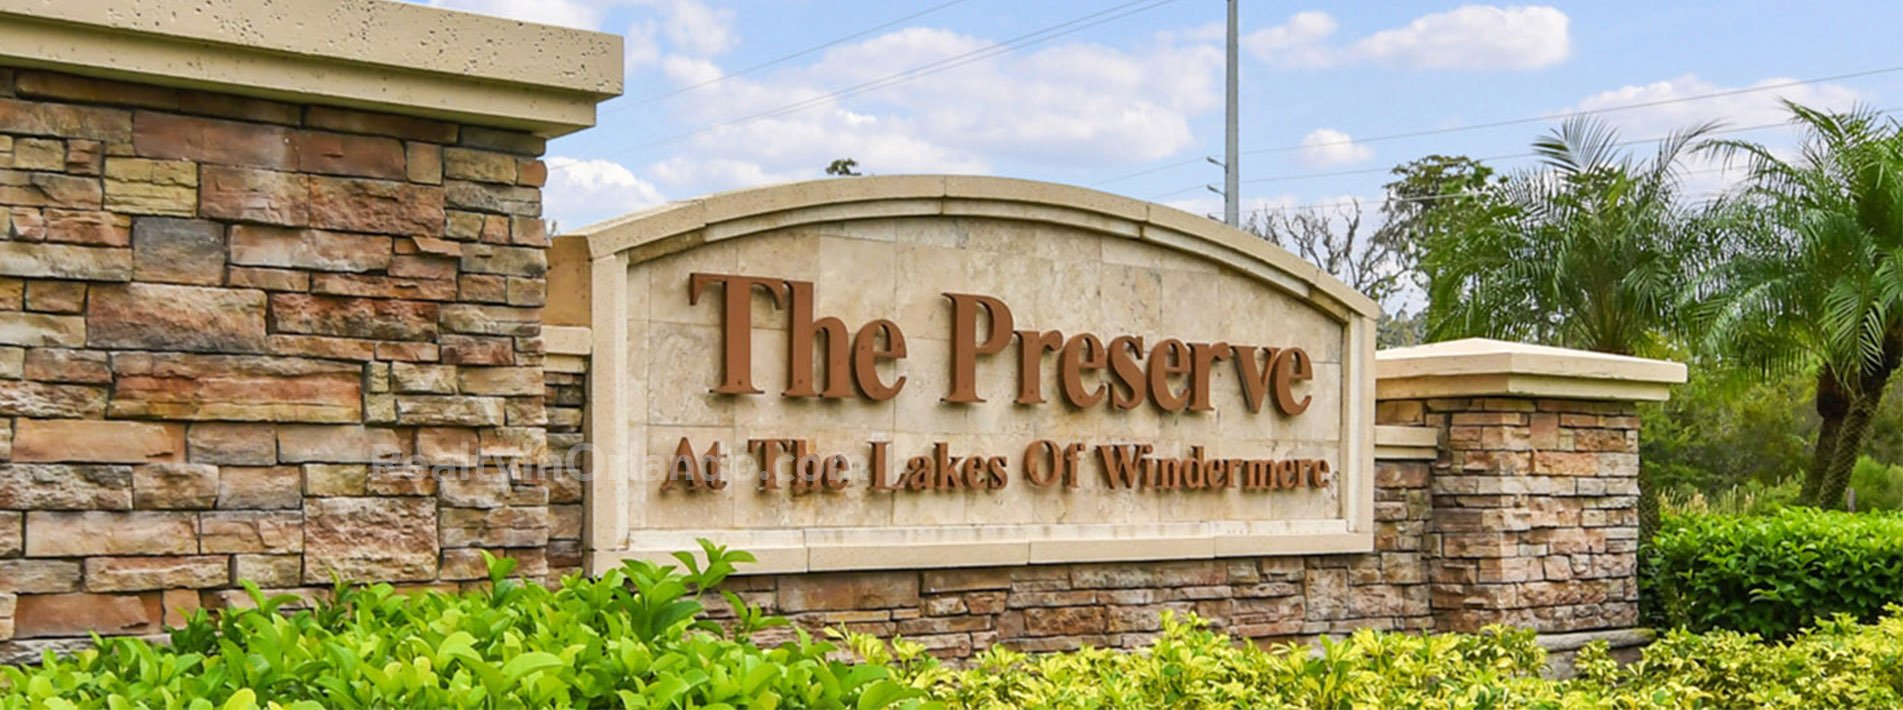 The Preserve at Lakes of Windermere Peachtree